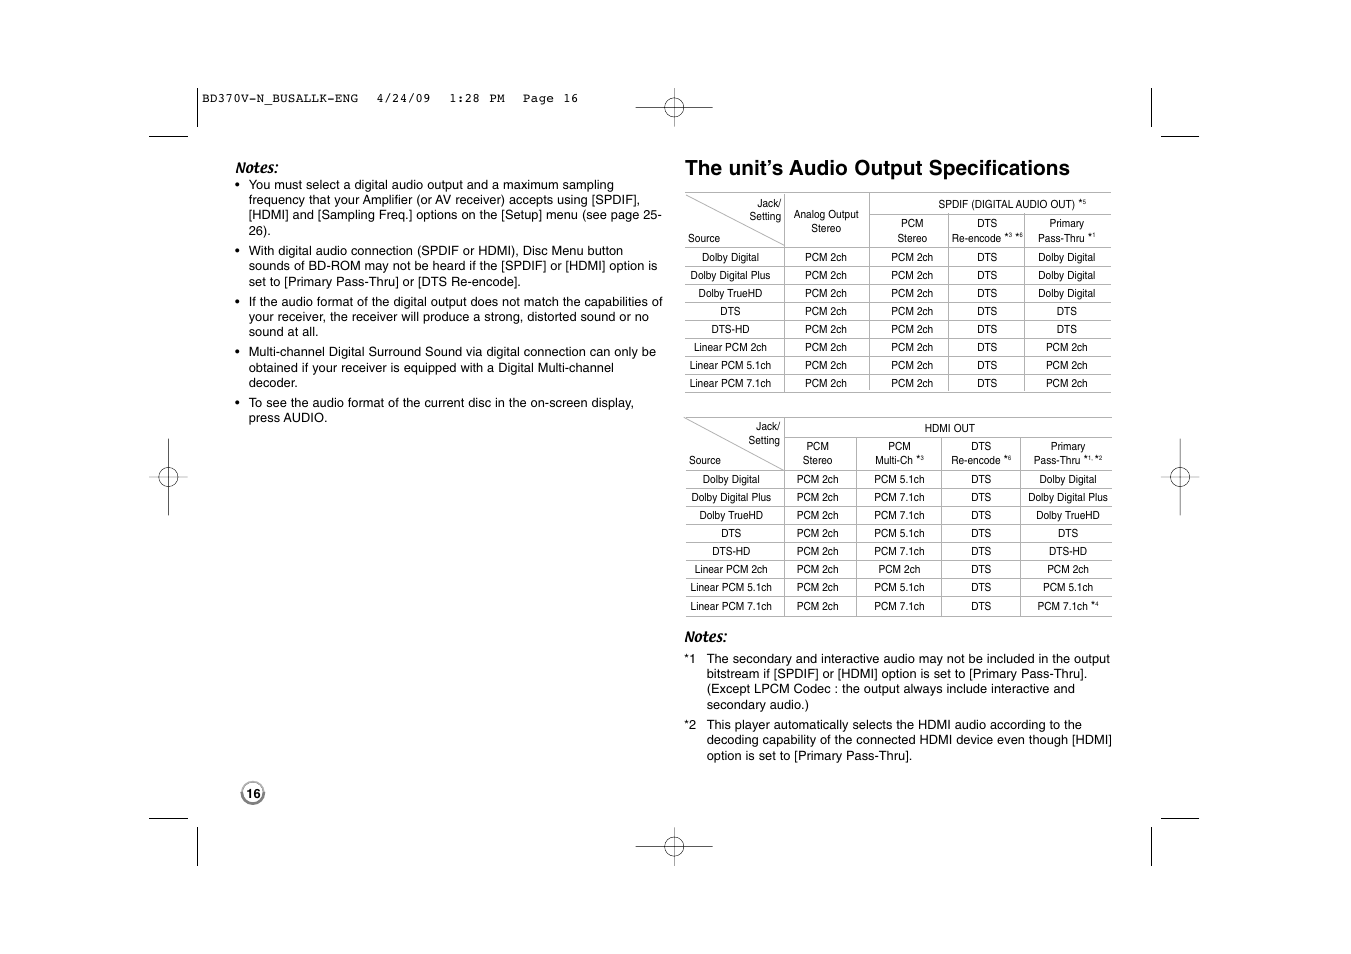 The unit’s audio output specifications | LG BD-370 User Manual | Page 16 / 56